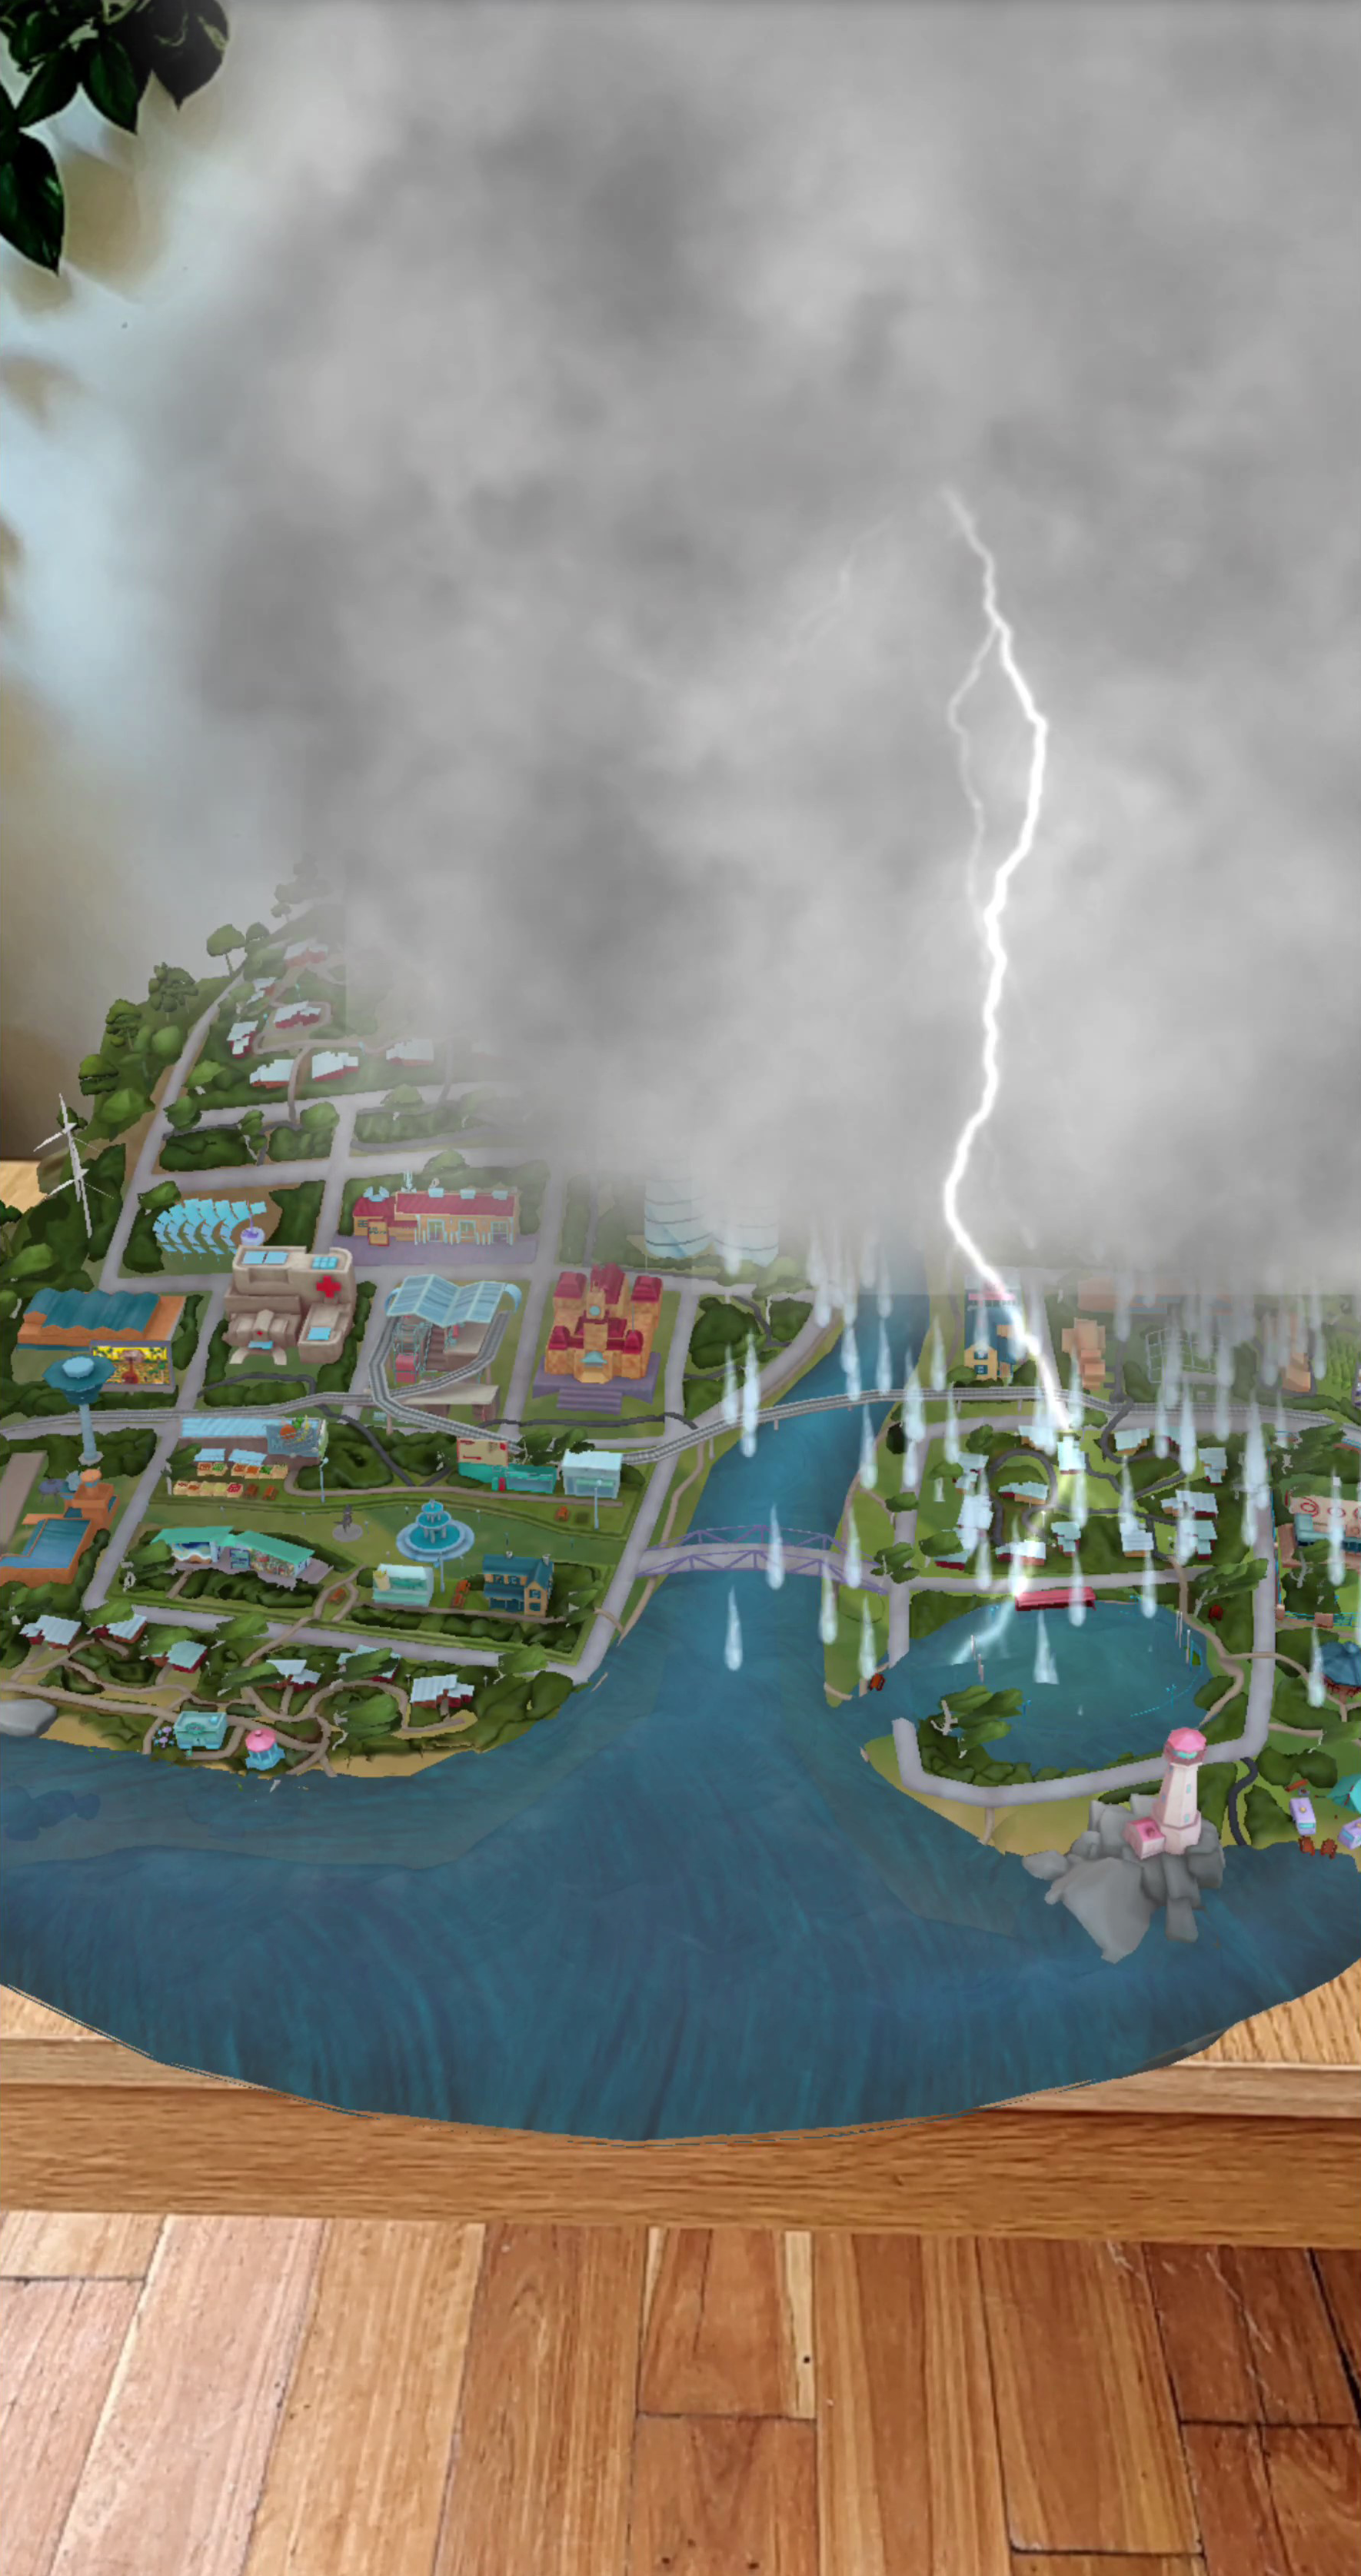 Artwork of lightning over Mt Resilience animated town.